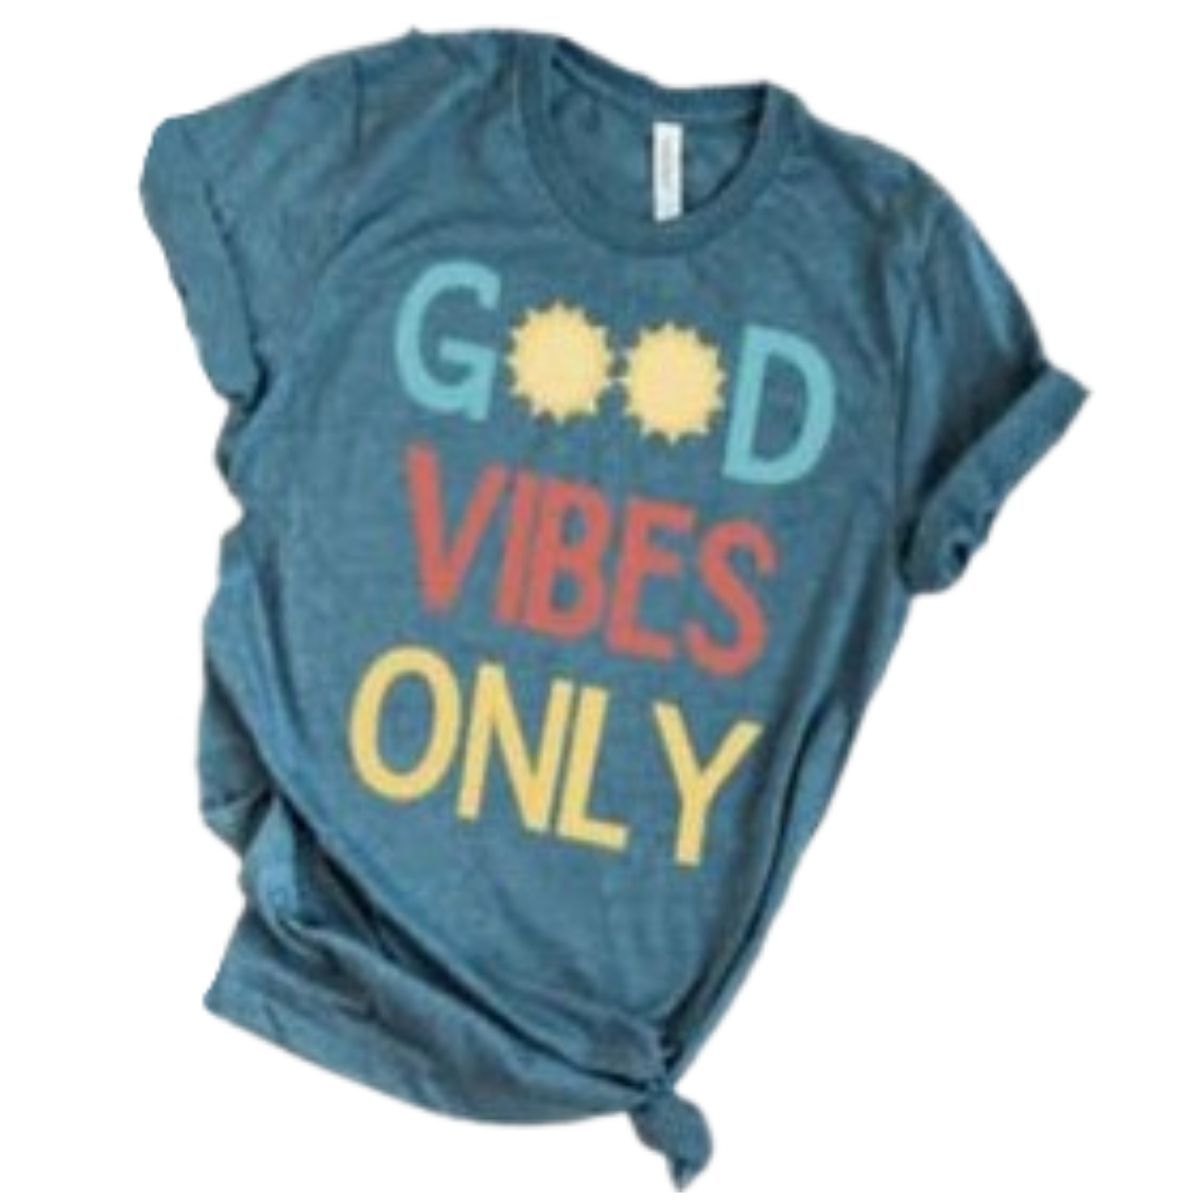 Good Vibes Only Tee [PREORDER]